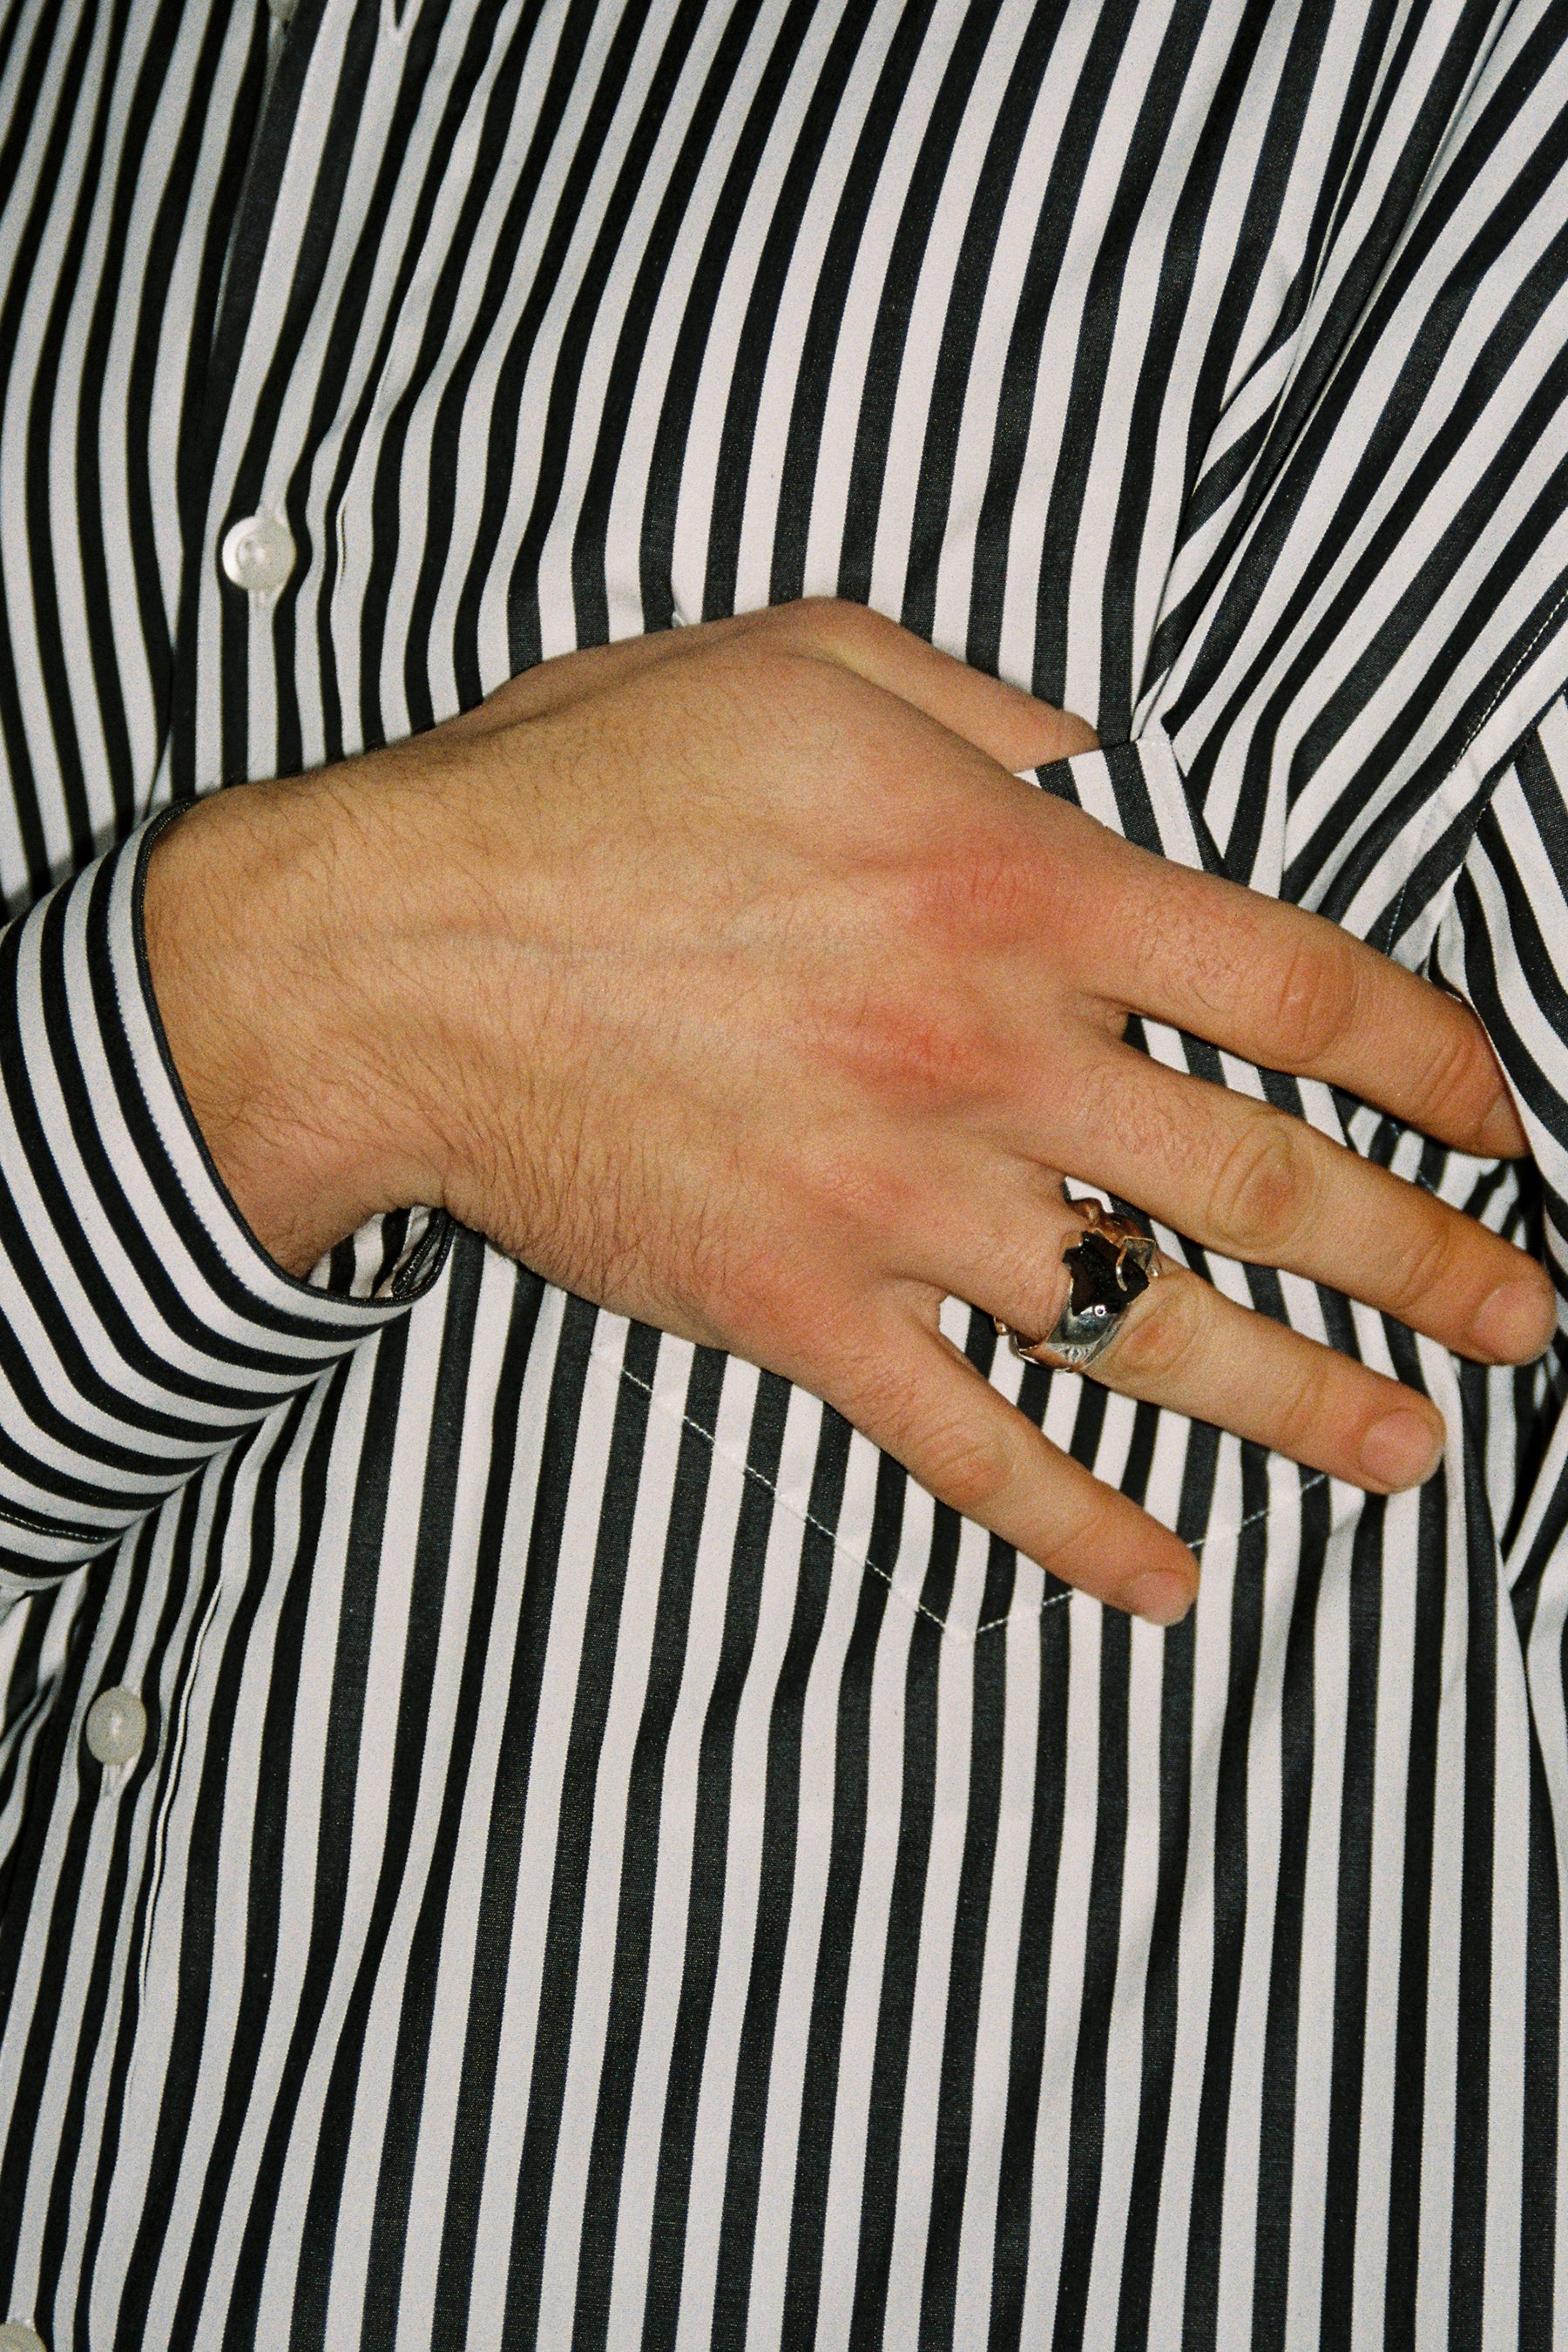 Spiral Silver Shirt Ring 001 with Black Ilvaite